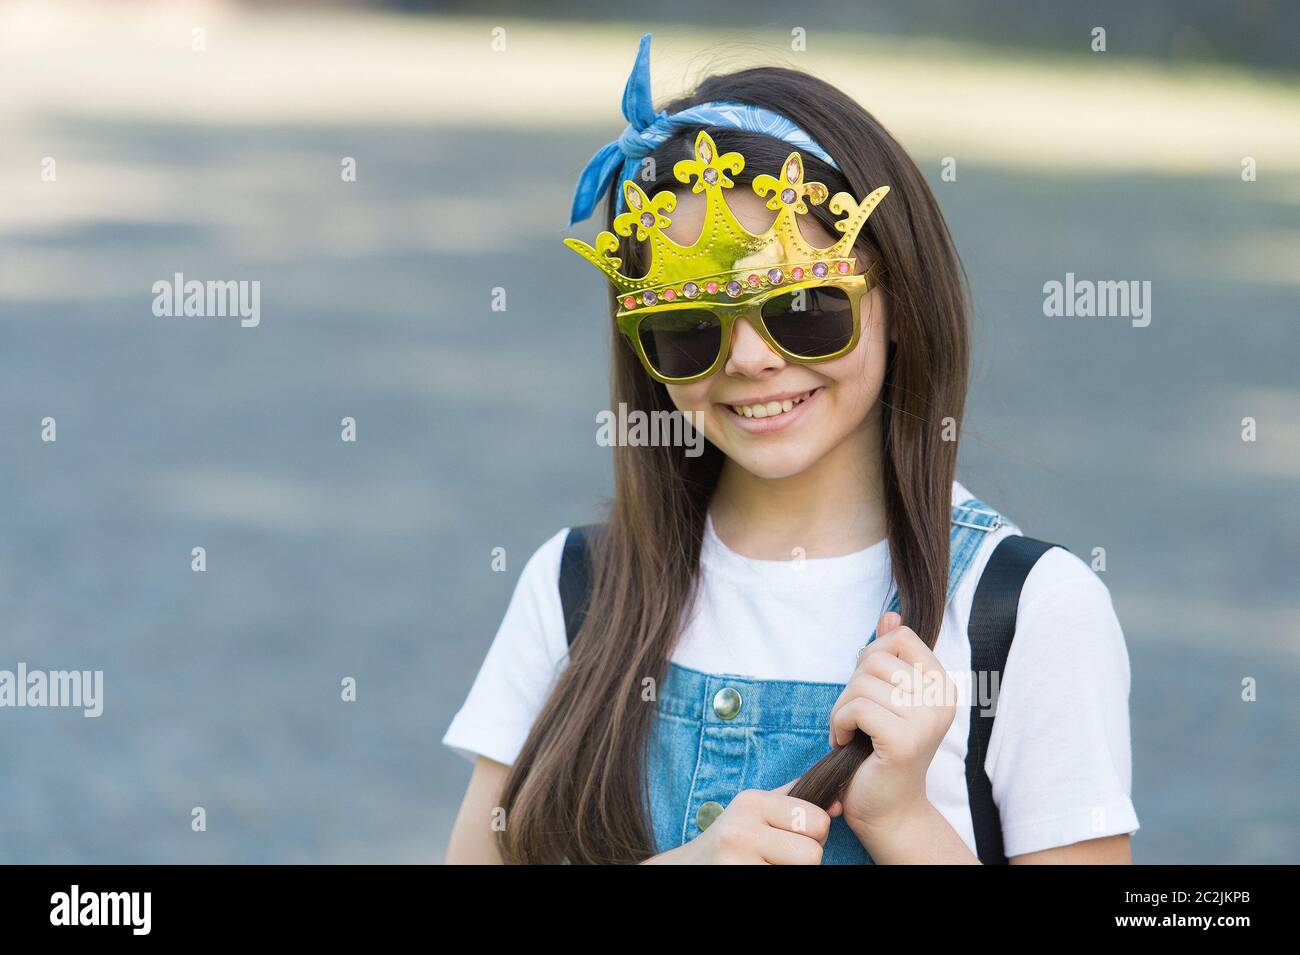 Live like you dream. Happy girl wear prop crown and glasses. Little miss beauty. Child beauty pageant crown. Party crown. Fashion accessories. Golden diadem or tiara. Big boss. Crown she deserves. Stock Photo